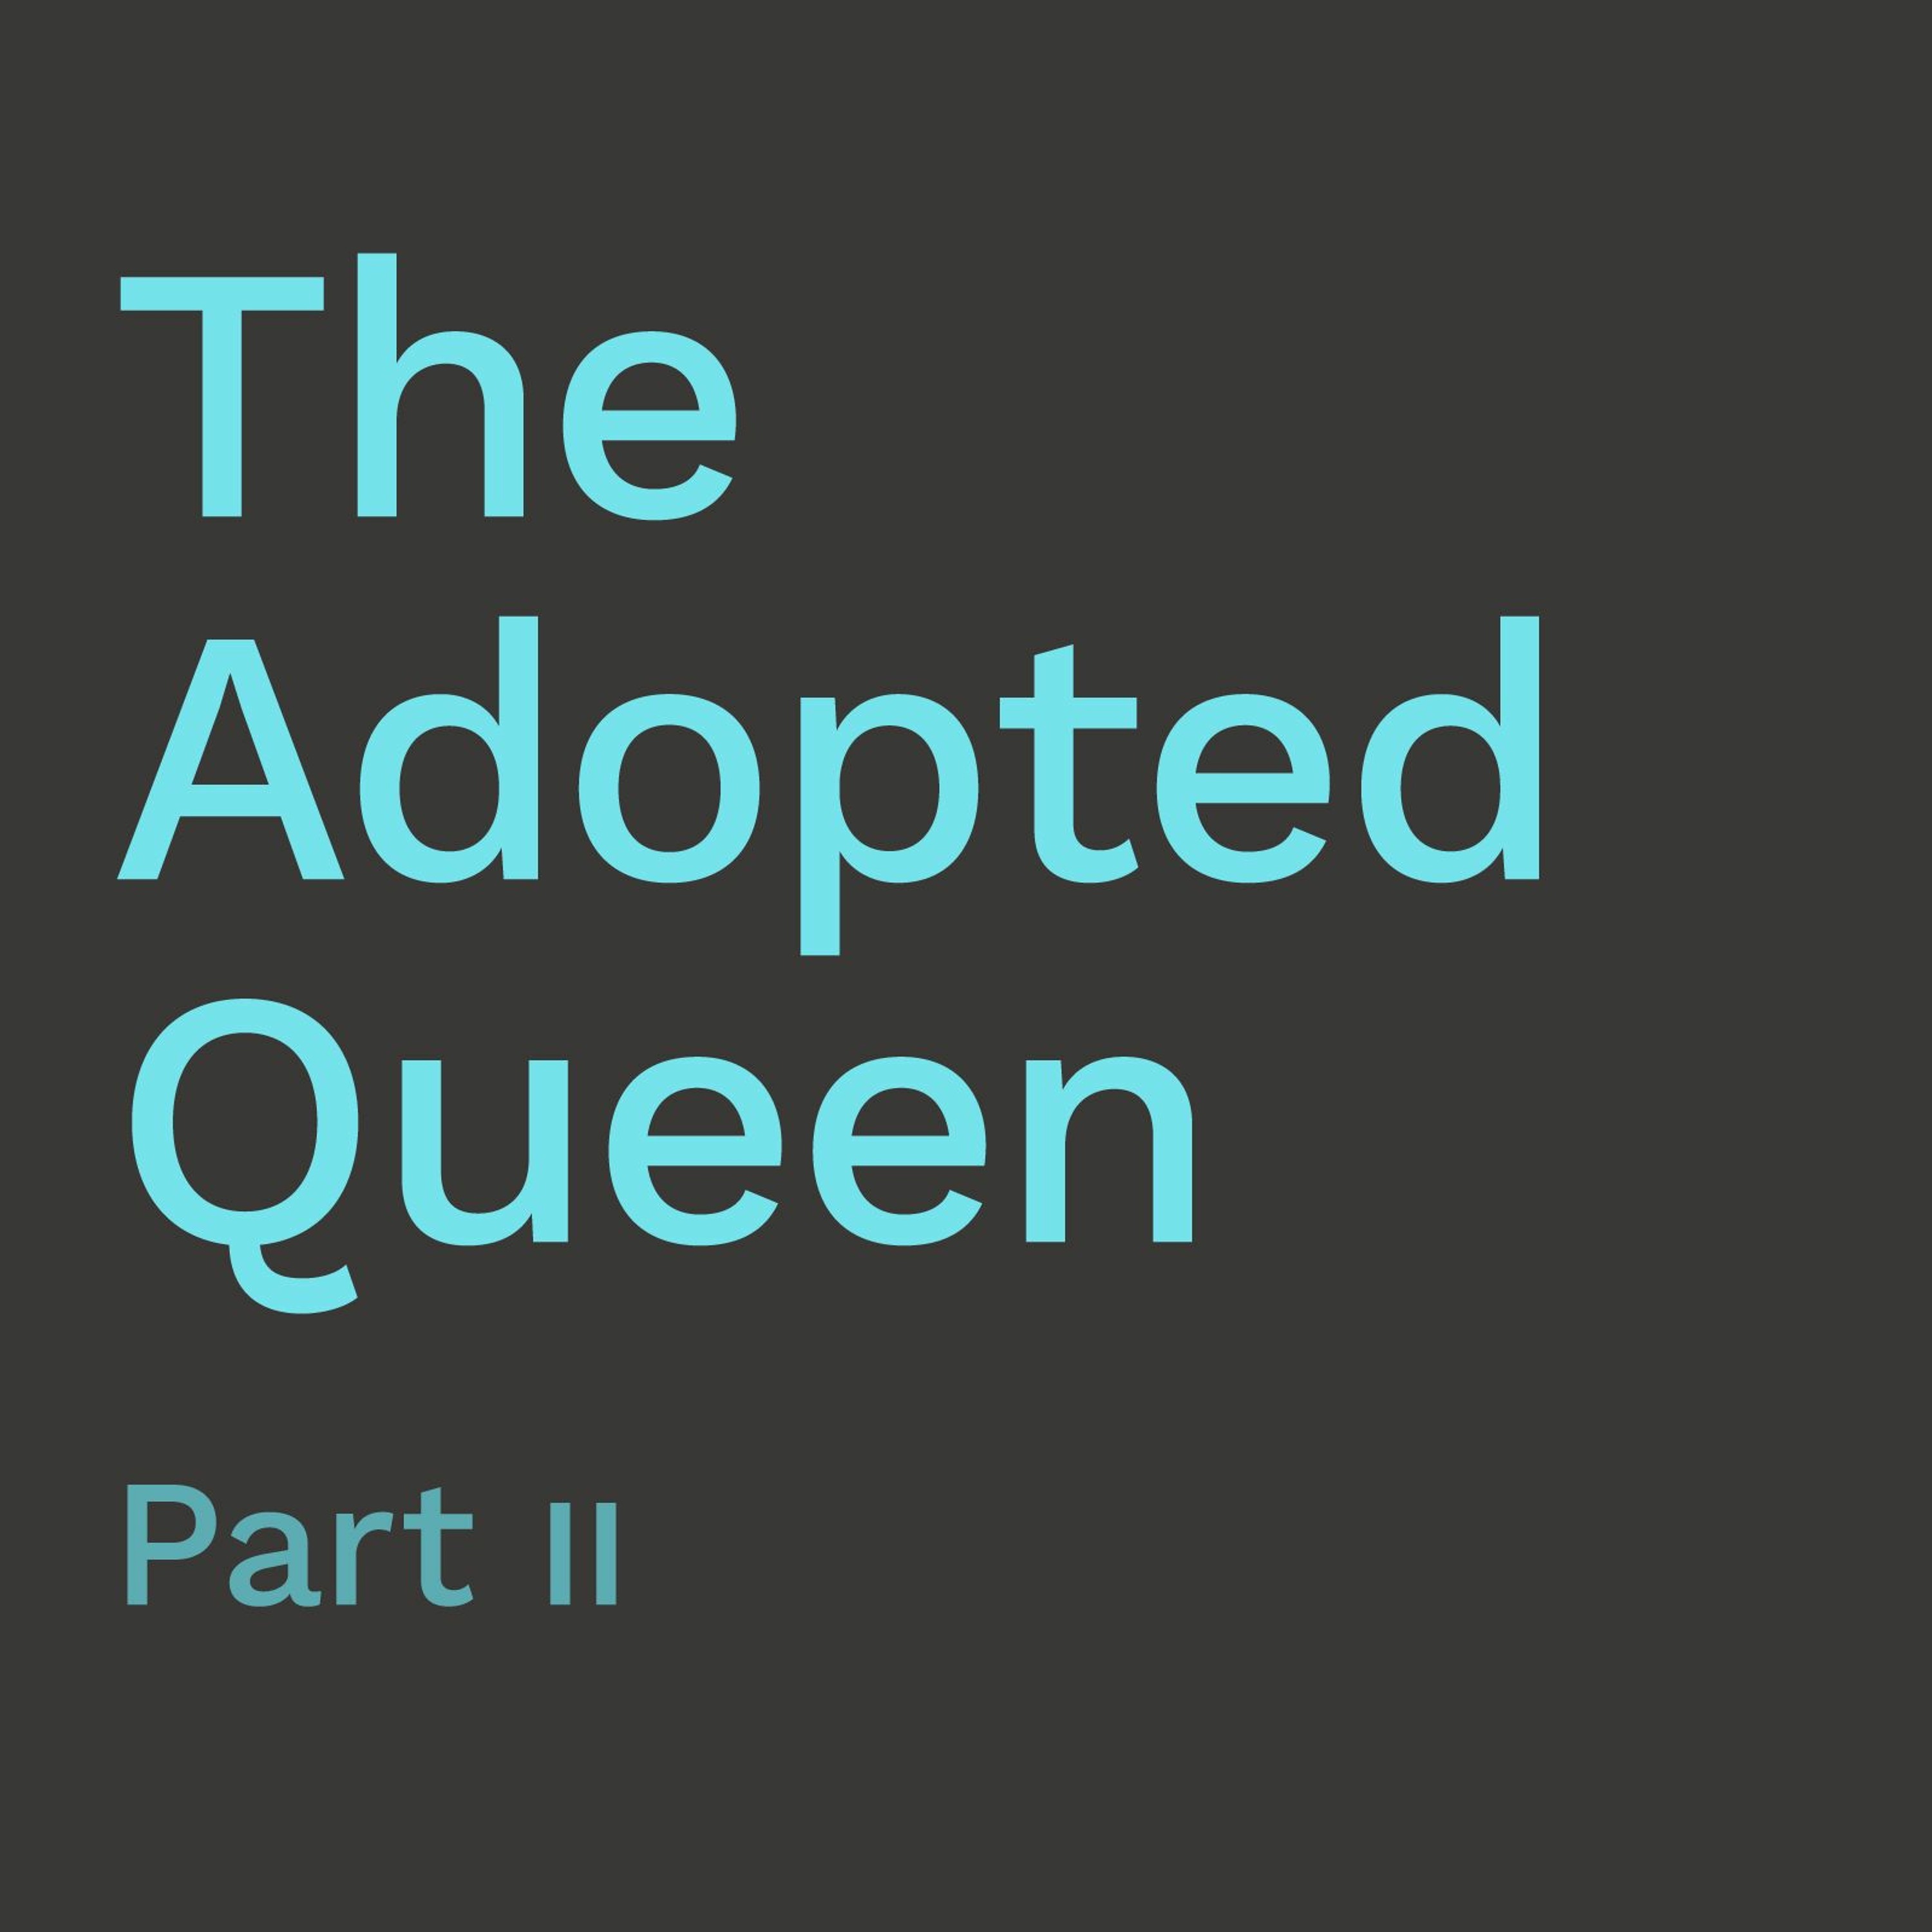 'The Adopted Queen' (Part 2) / Neville Garland